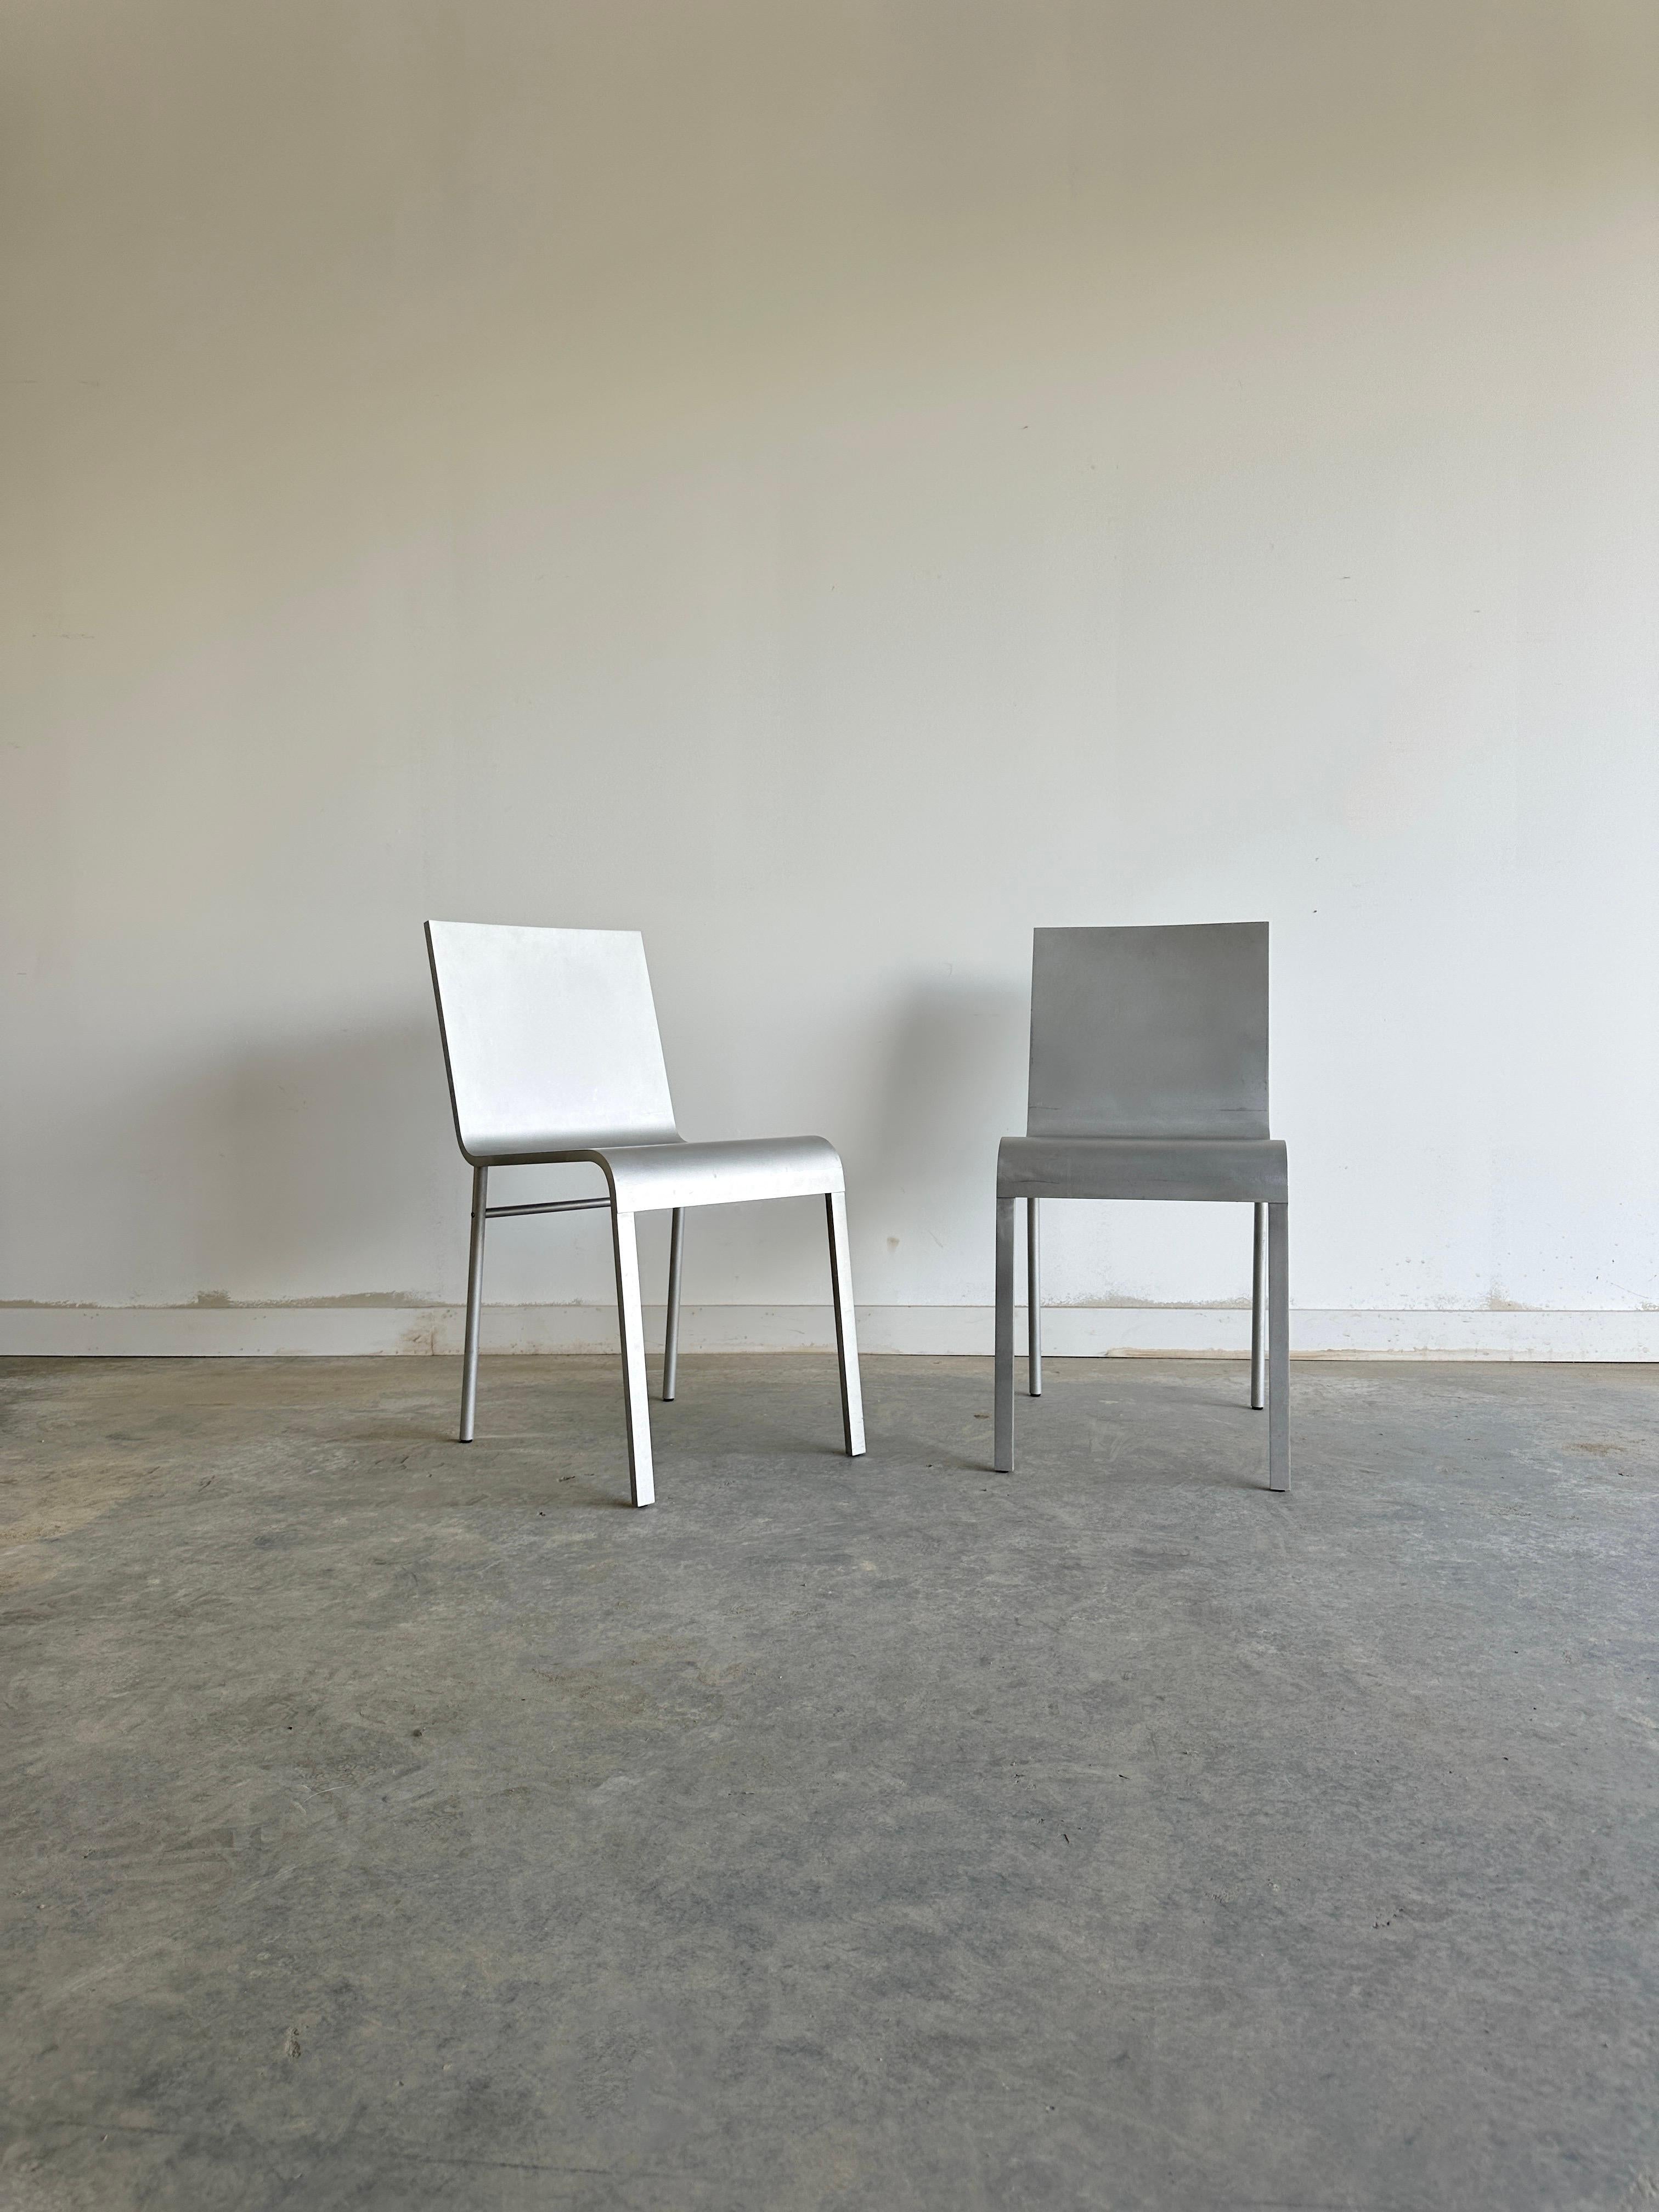 A pair of Maarten van Severen CN° II chairs is a rare and exciting find for any design lover. These chairs were created in 1992 by the Belgian designer, who was known for his minimalist and refined style. The chairs are made of bent aluminum sheet